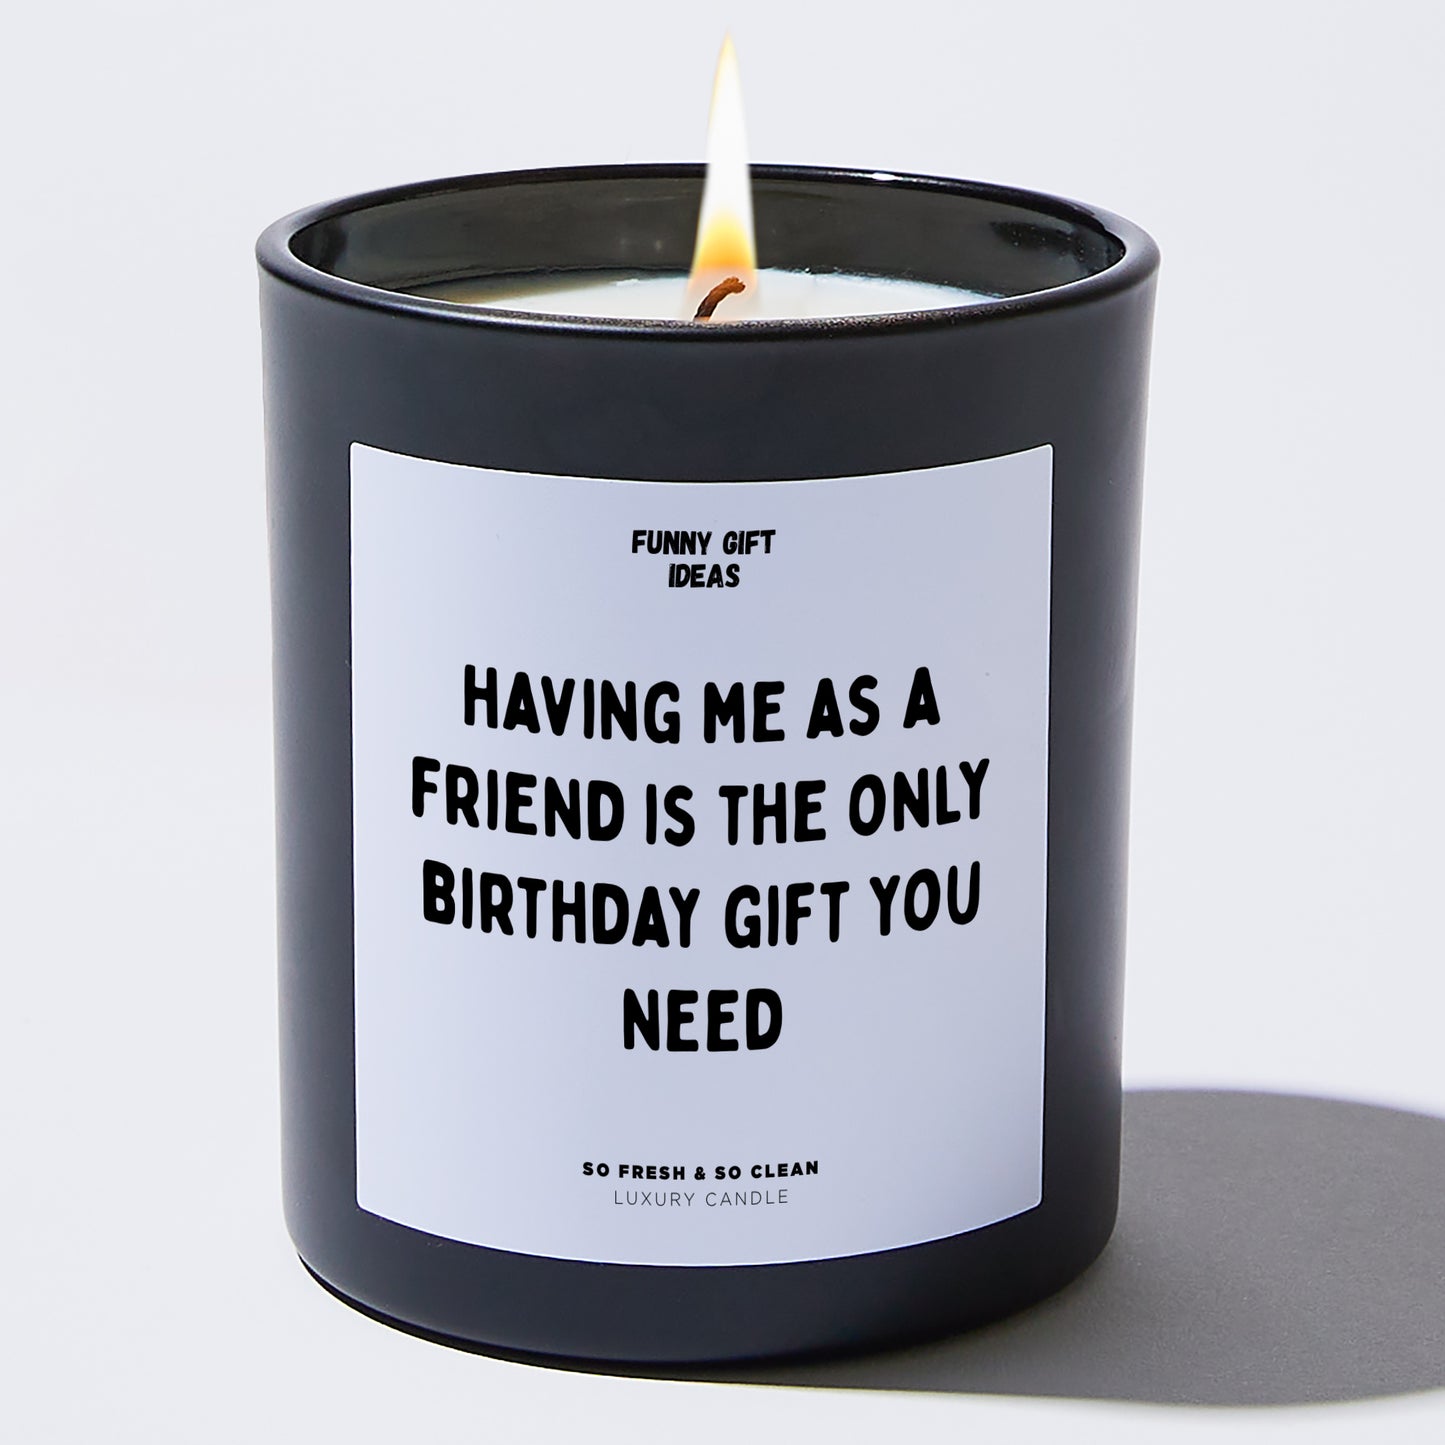 Happy Birthday Gift - Having Me As A Friend Is The Only Happy Birthday Gift You Need - Candle